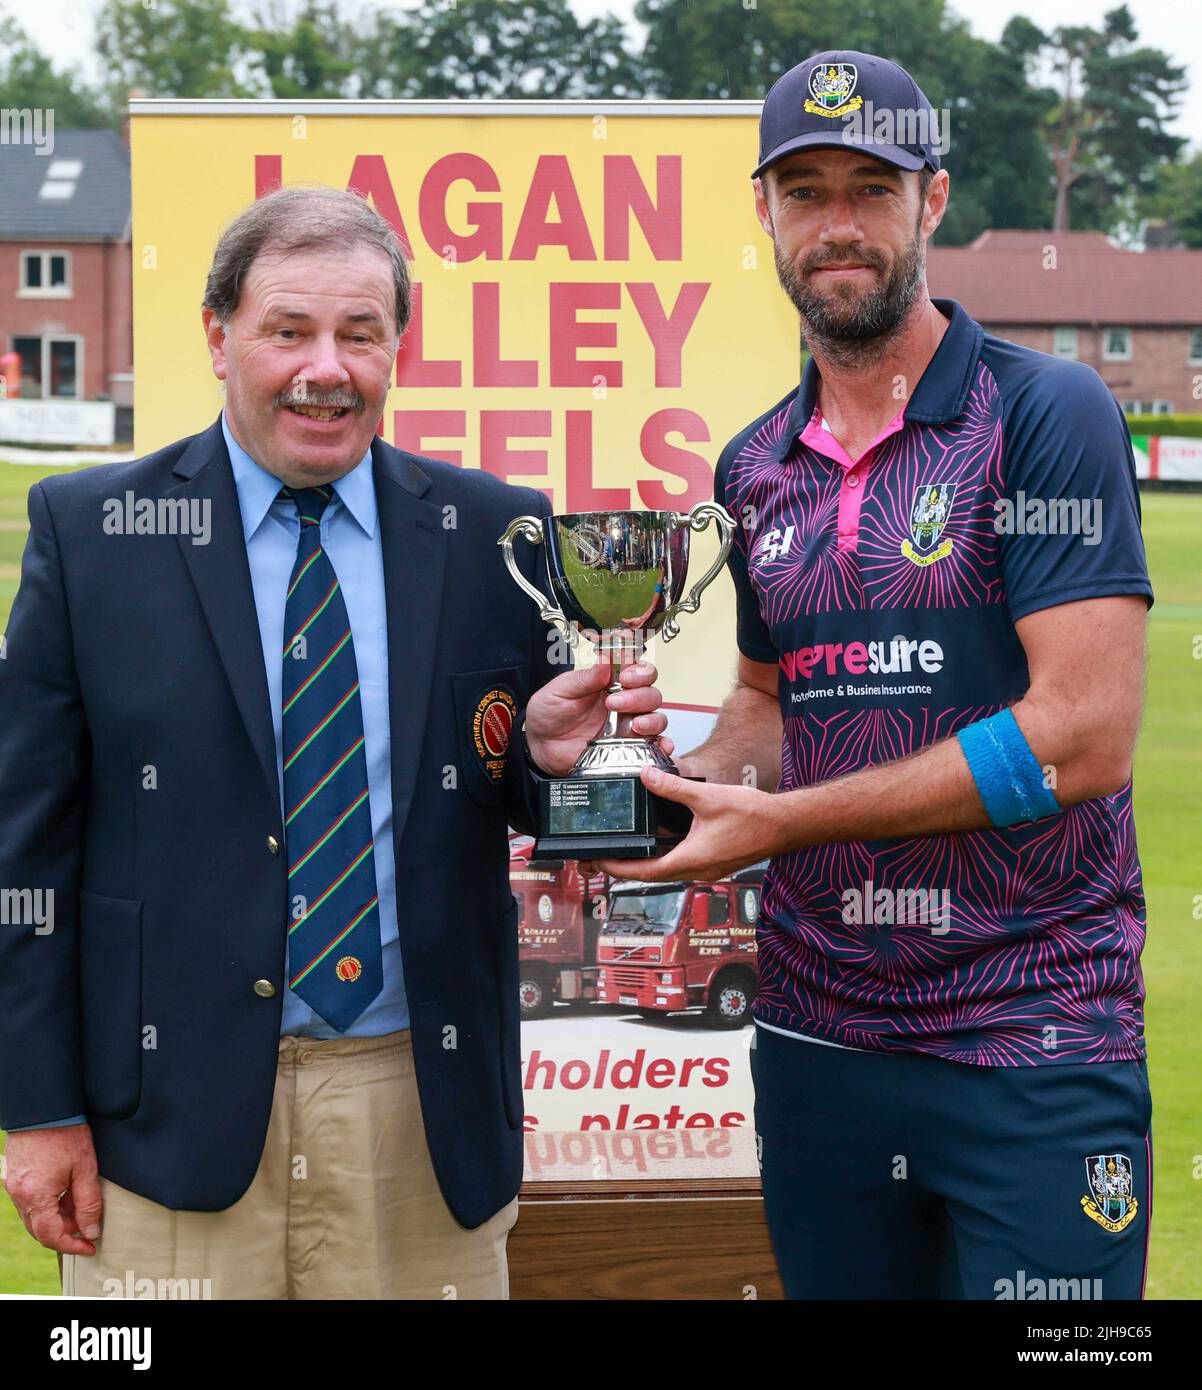 The Lawn, Waringstown, Northern Ireland, UK. 16 Jul 2022. The Lagan Valley Steels Twenty 20 Cup Final 2022. CIYMS v CSNI – CIYMS won by 16 runs (DLS) in a rain-affected match. Northern Cricket Union President Roger Bell presents the cup to CIYMS captain Nigel Jones. Credit: David Hunter/Alamy Live News Stock Photo